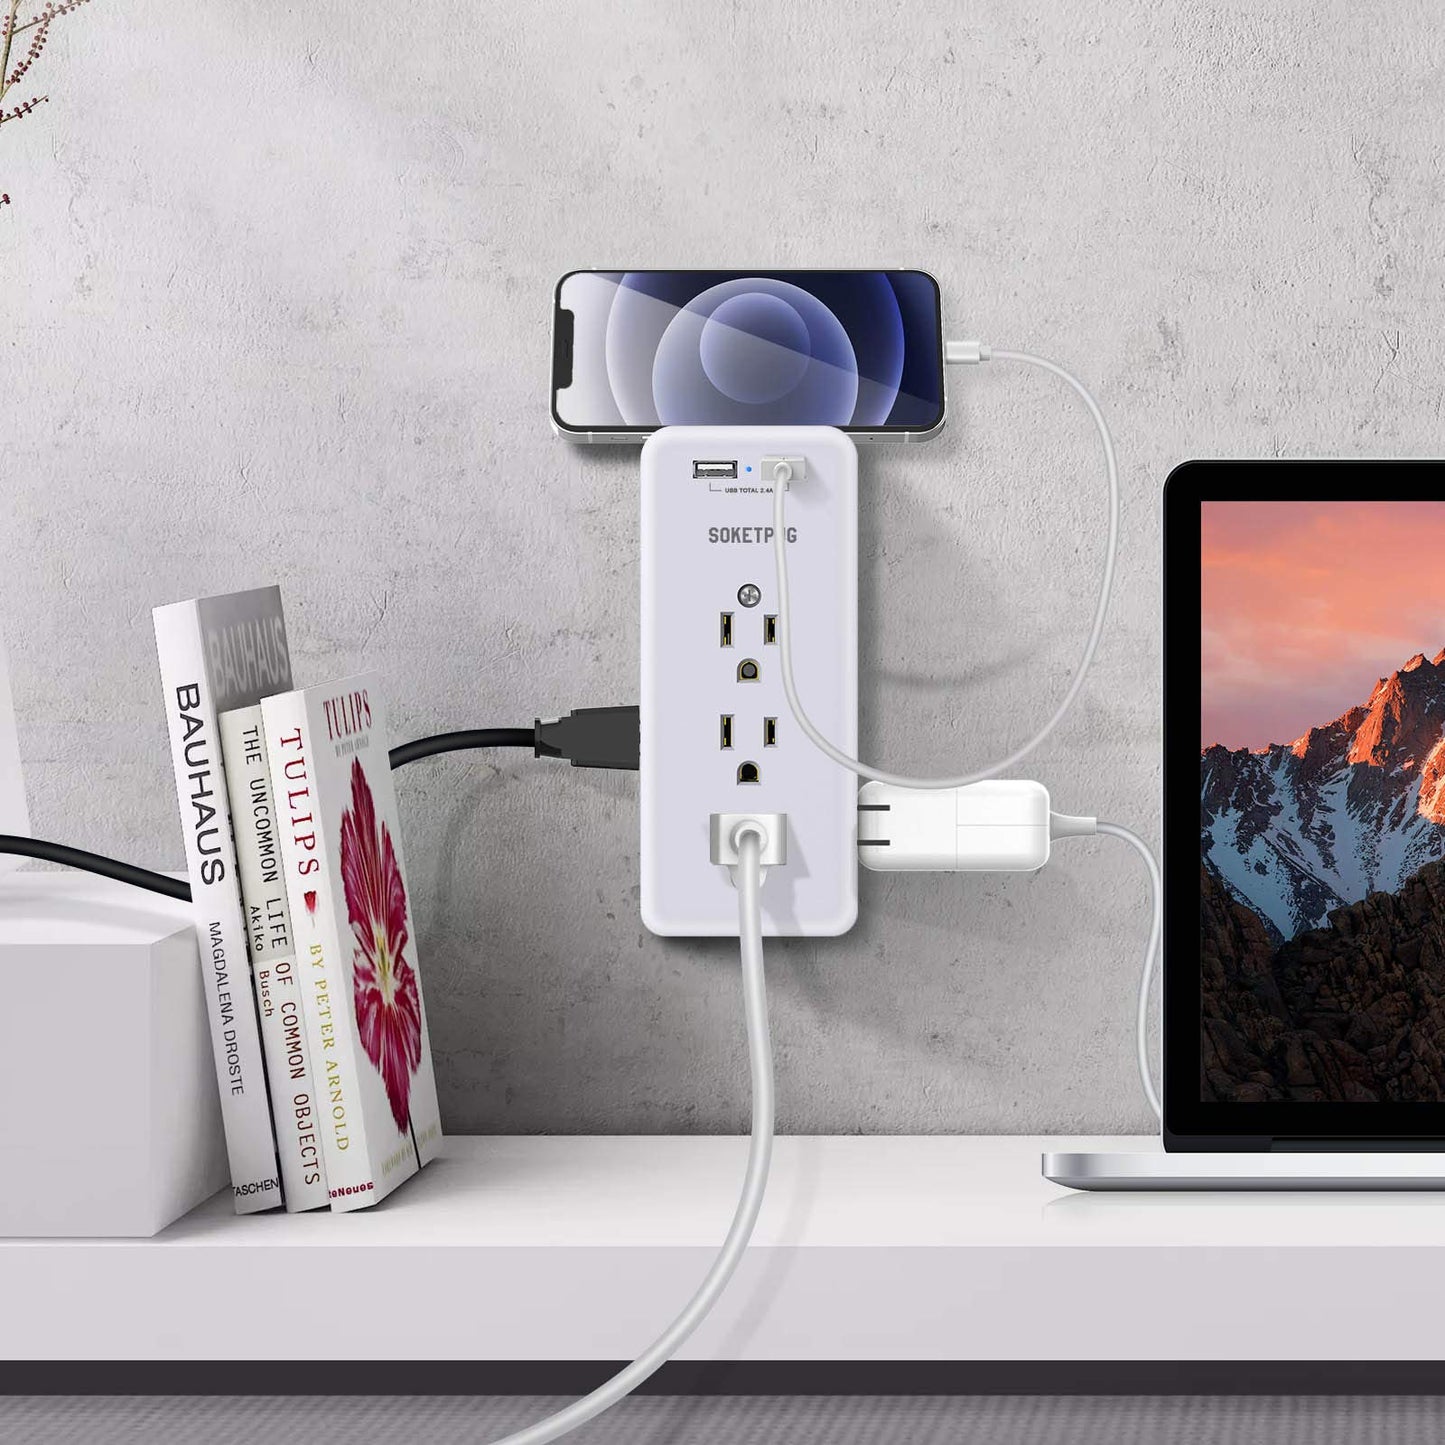 Surge Protector Outlet Extender, USB Wall Charger, SOKETPUG Multi Plug Outlet with 2 USB Charging Ports(Smart 2.4A Total), 9 AC Outlet Splitter Mountable, 3 Sided Plug Extender, Dorm Room Essentials